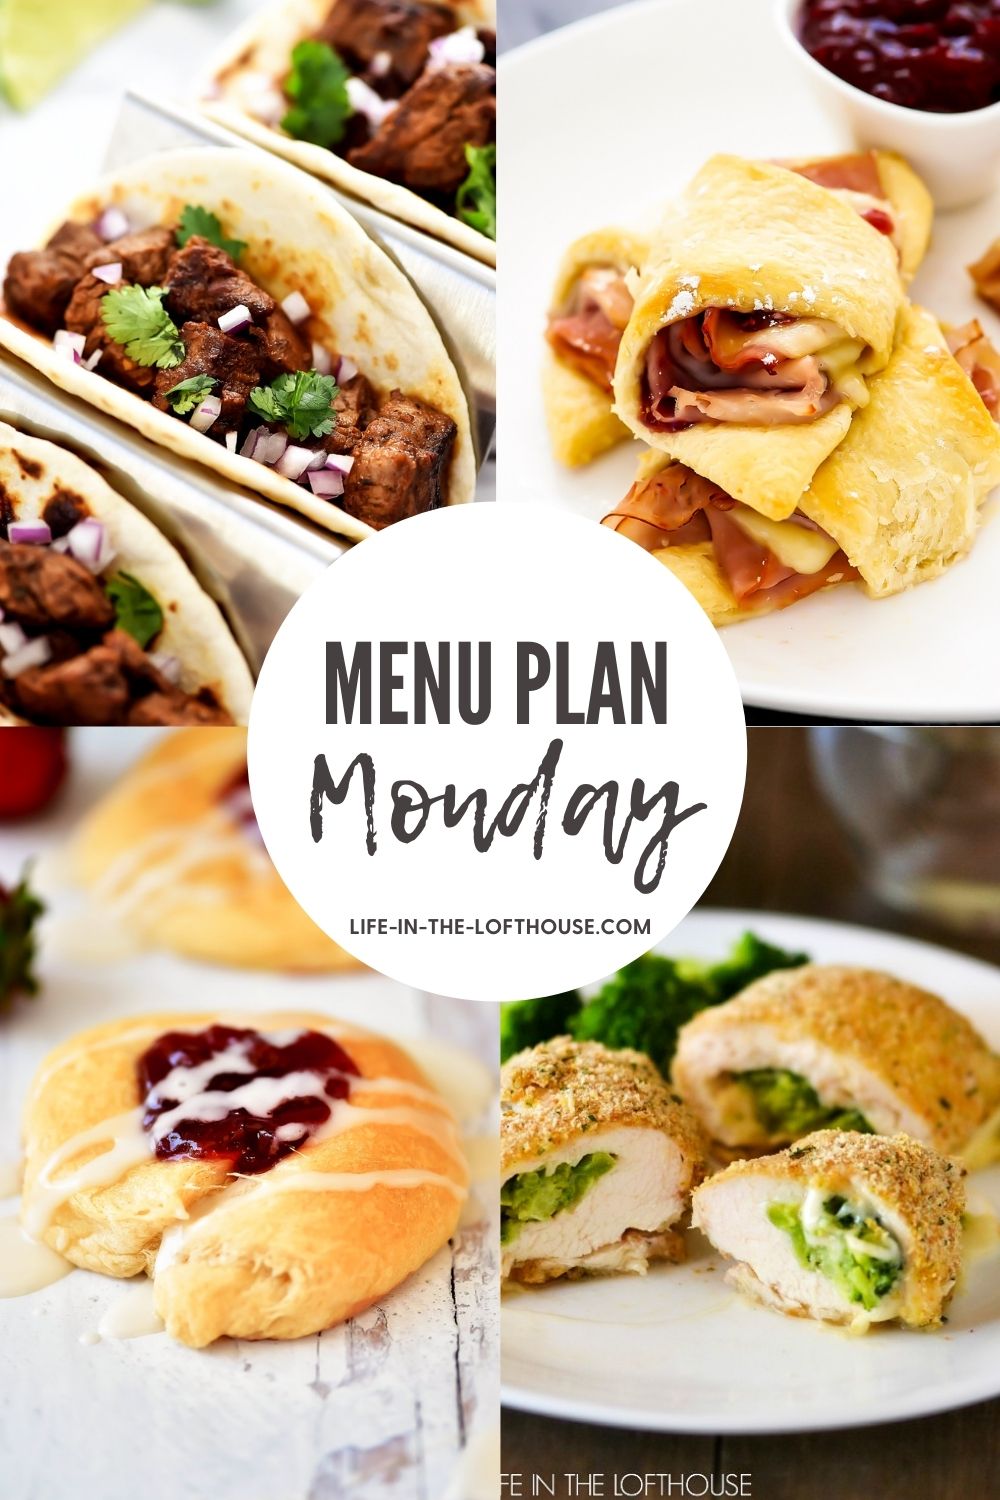 Menu Plan Monday is an easy guide to help you decide what to make for dinner. Each menu has six delicious dinner ideas and one dessert!